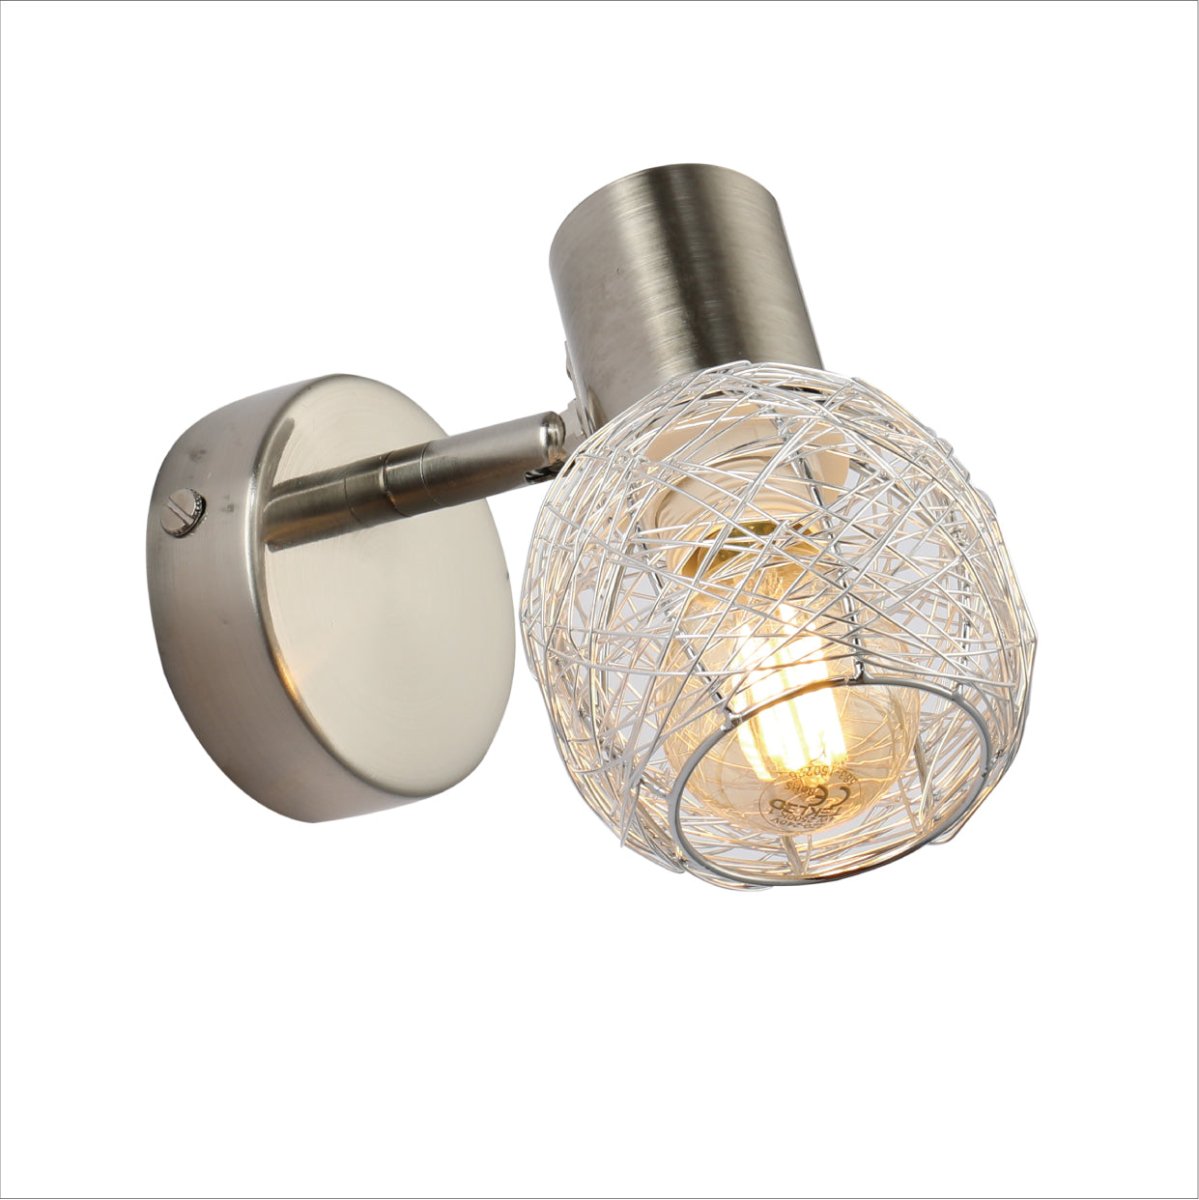 Main image of Matte Nickel Metal Silver Globe Nest Hinged Wall Light with E14 Fitting | TEKLED 151-19697